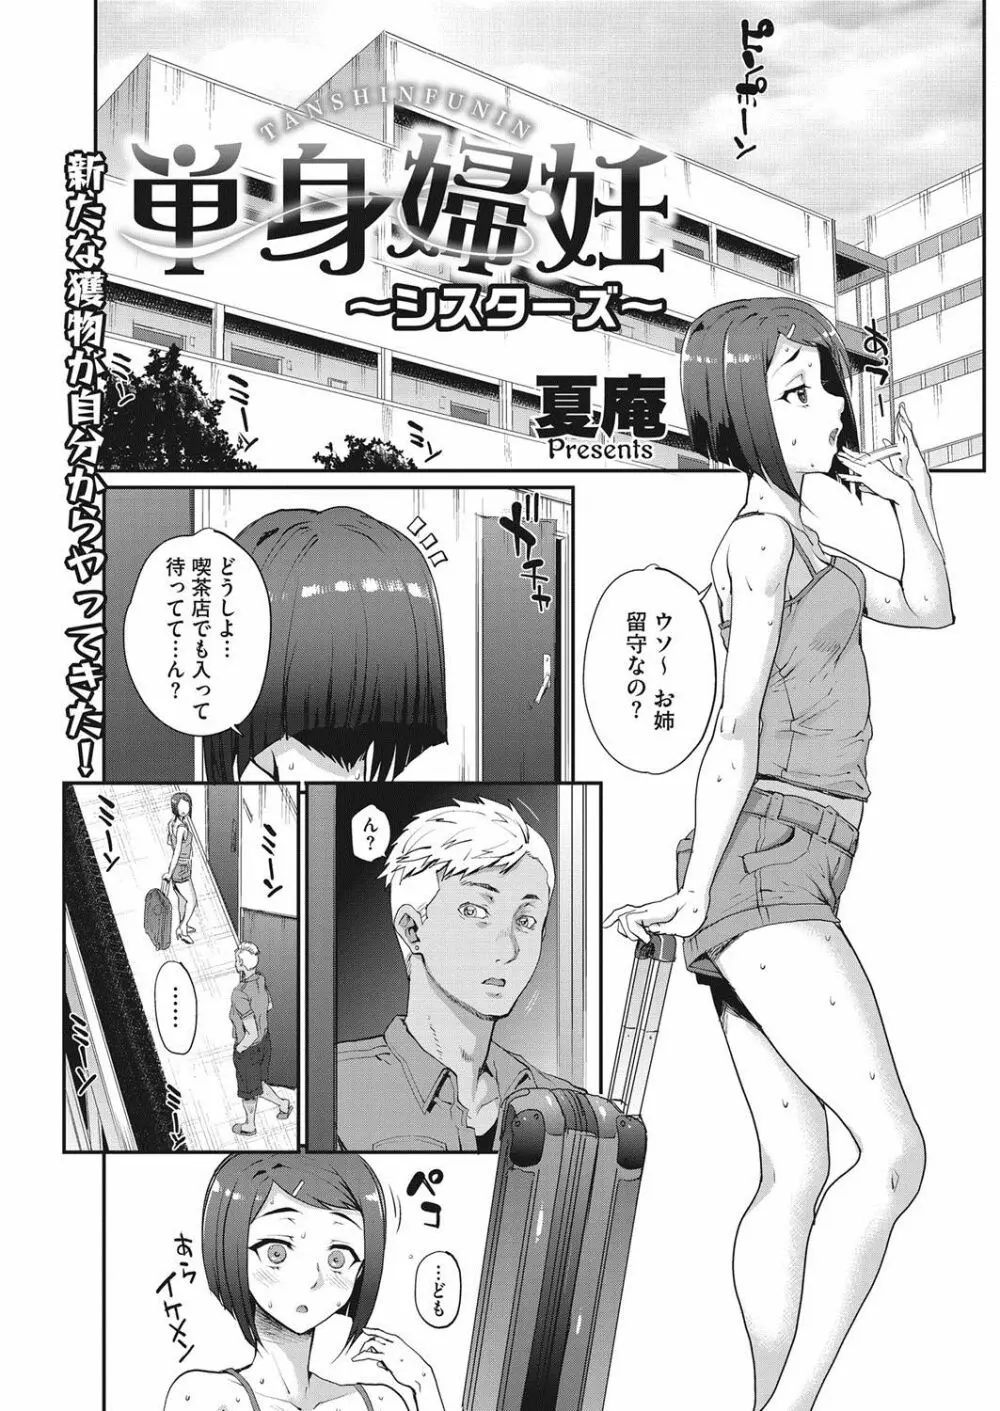 [Carn] Tanshinfunin ~Sisters~ Ch 1-7 43ページ